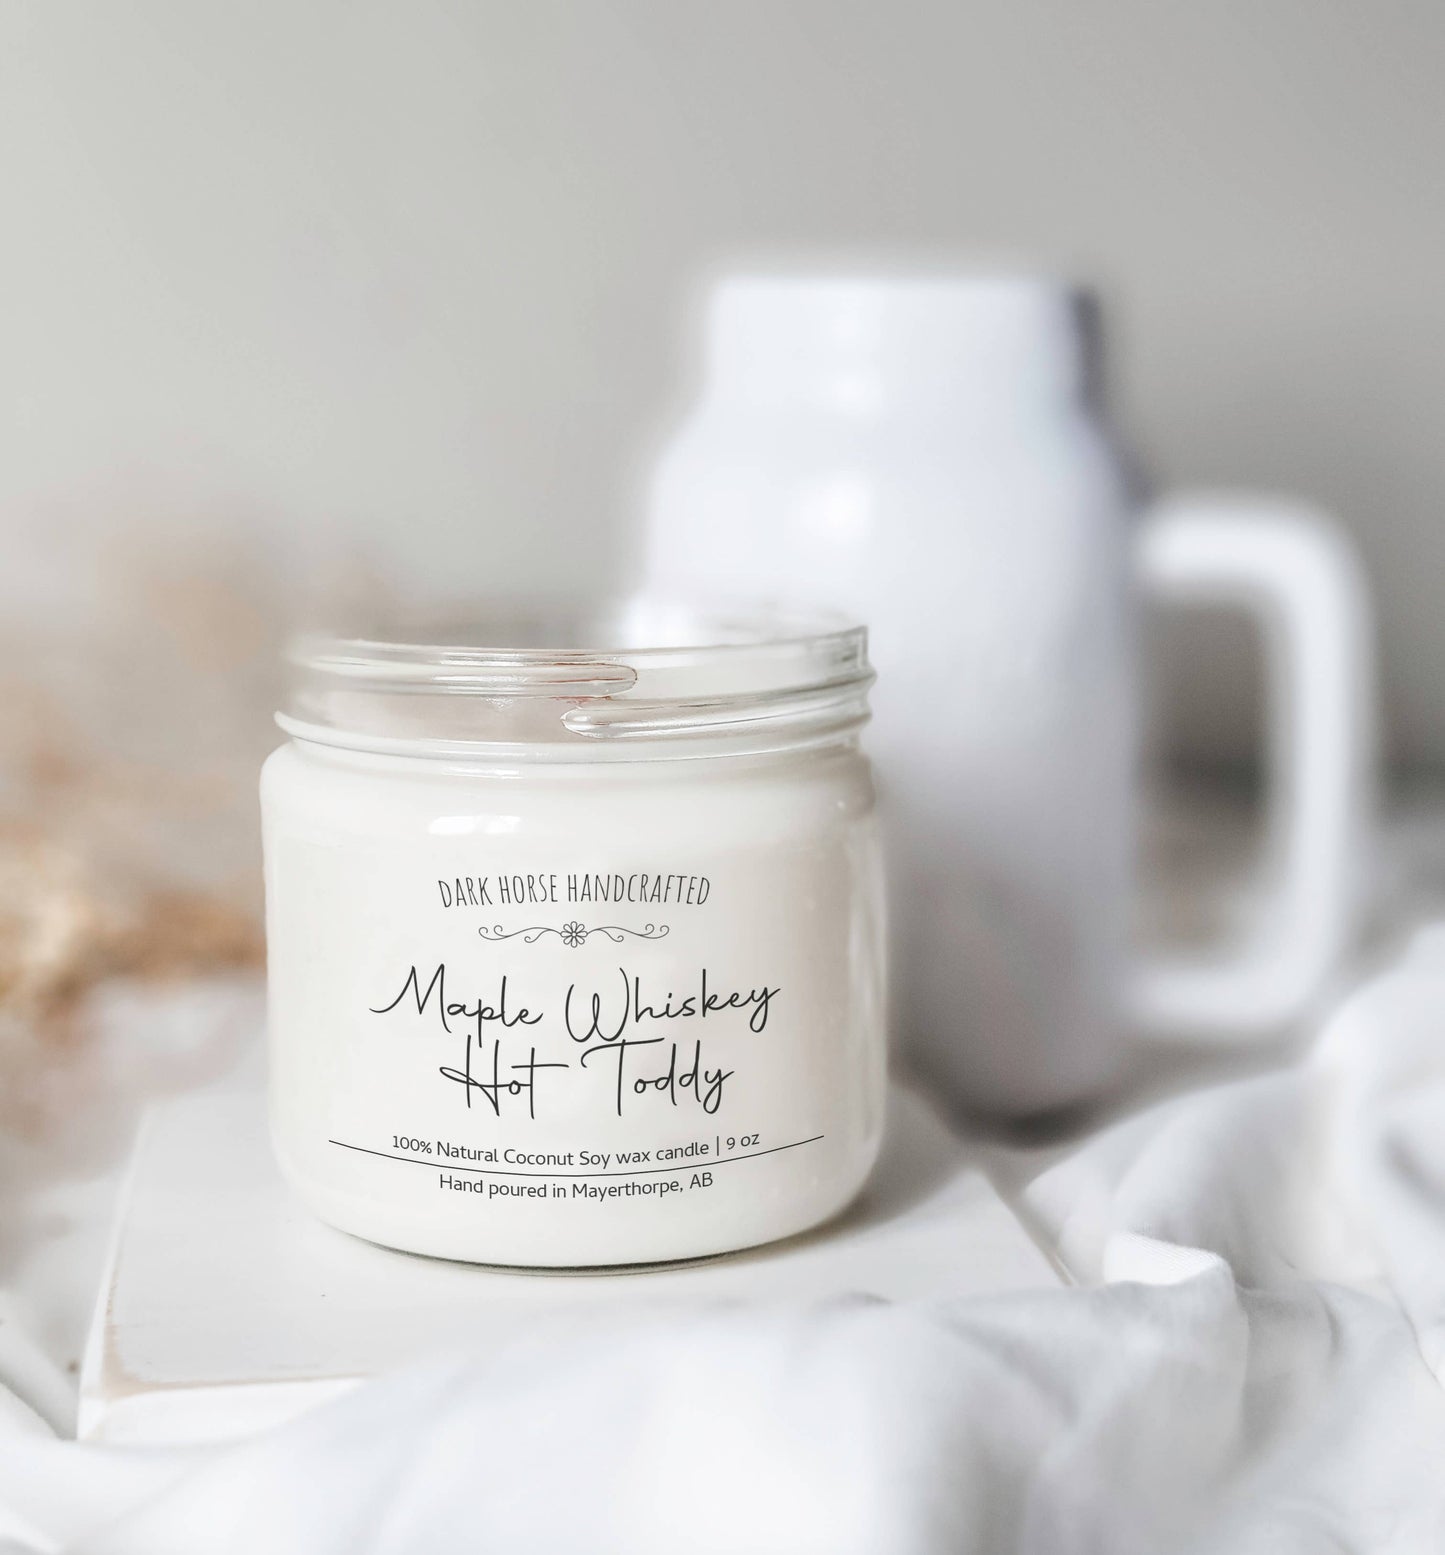 Maple Whiskey Hot Toddy- 100% Natural Coconut Soy Wax Candle